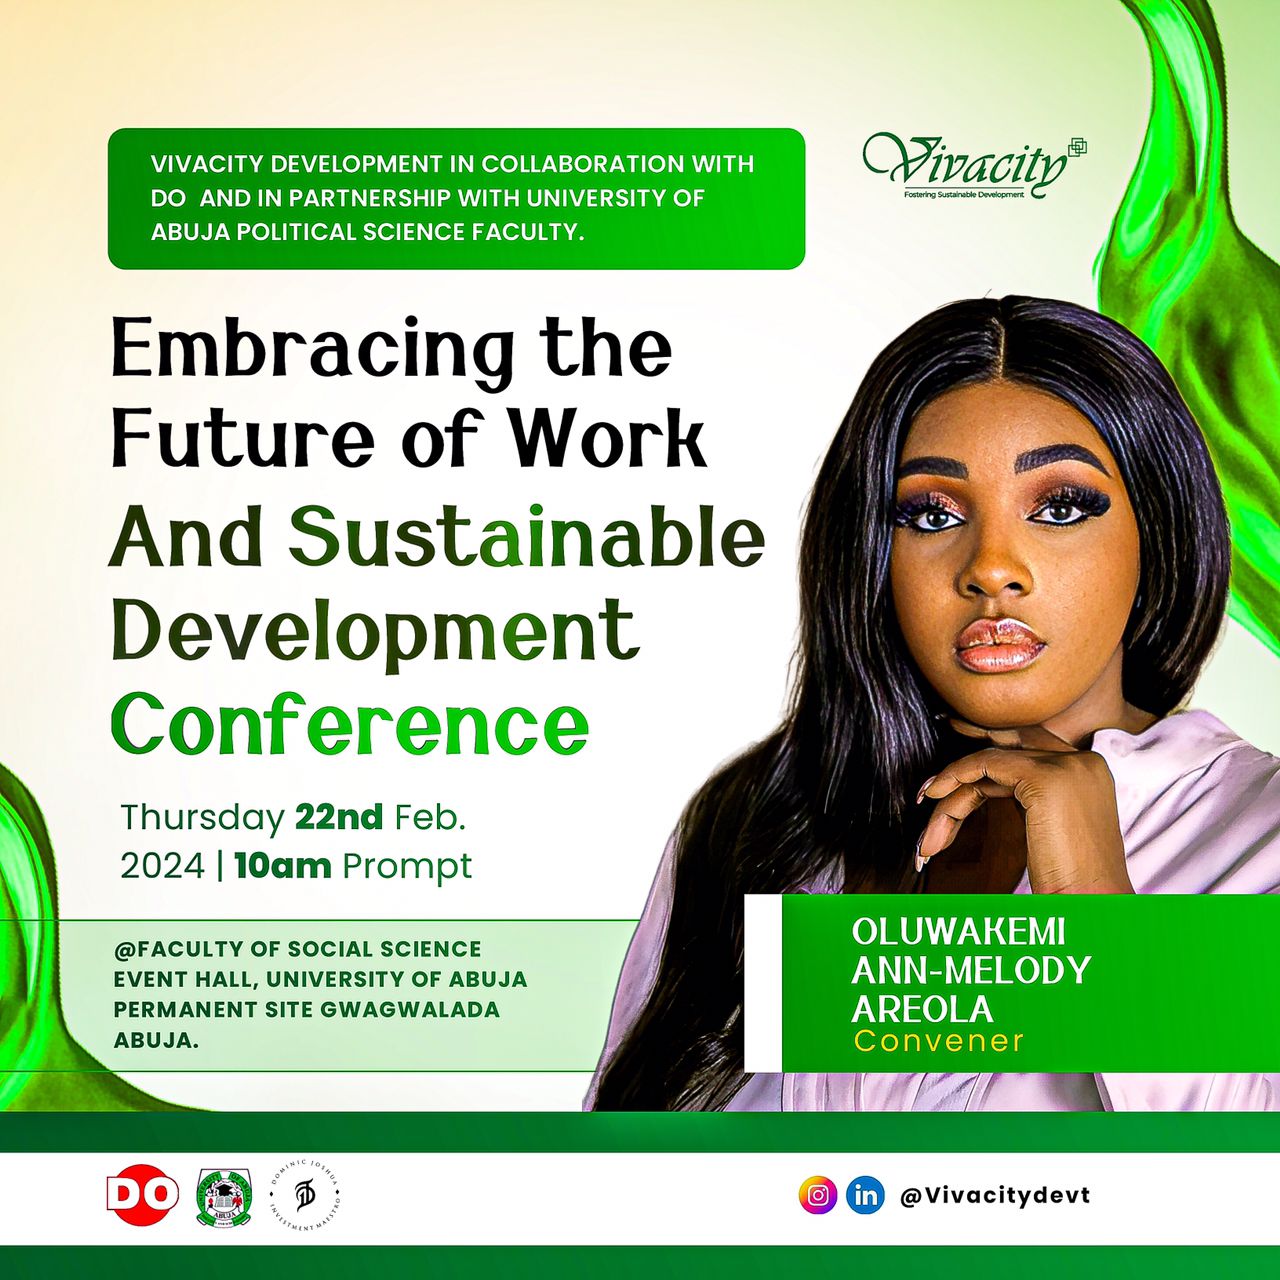 Oluwakemi Areola's Vivacity Development Pioneers Youth Empowerment for a Sustainable Future